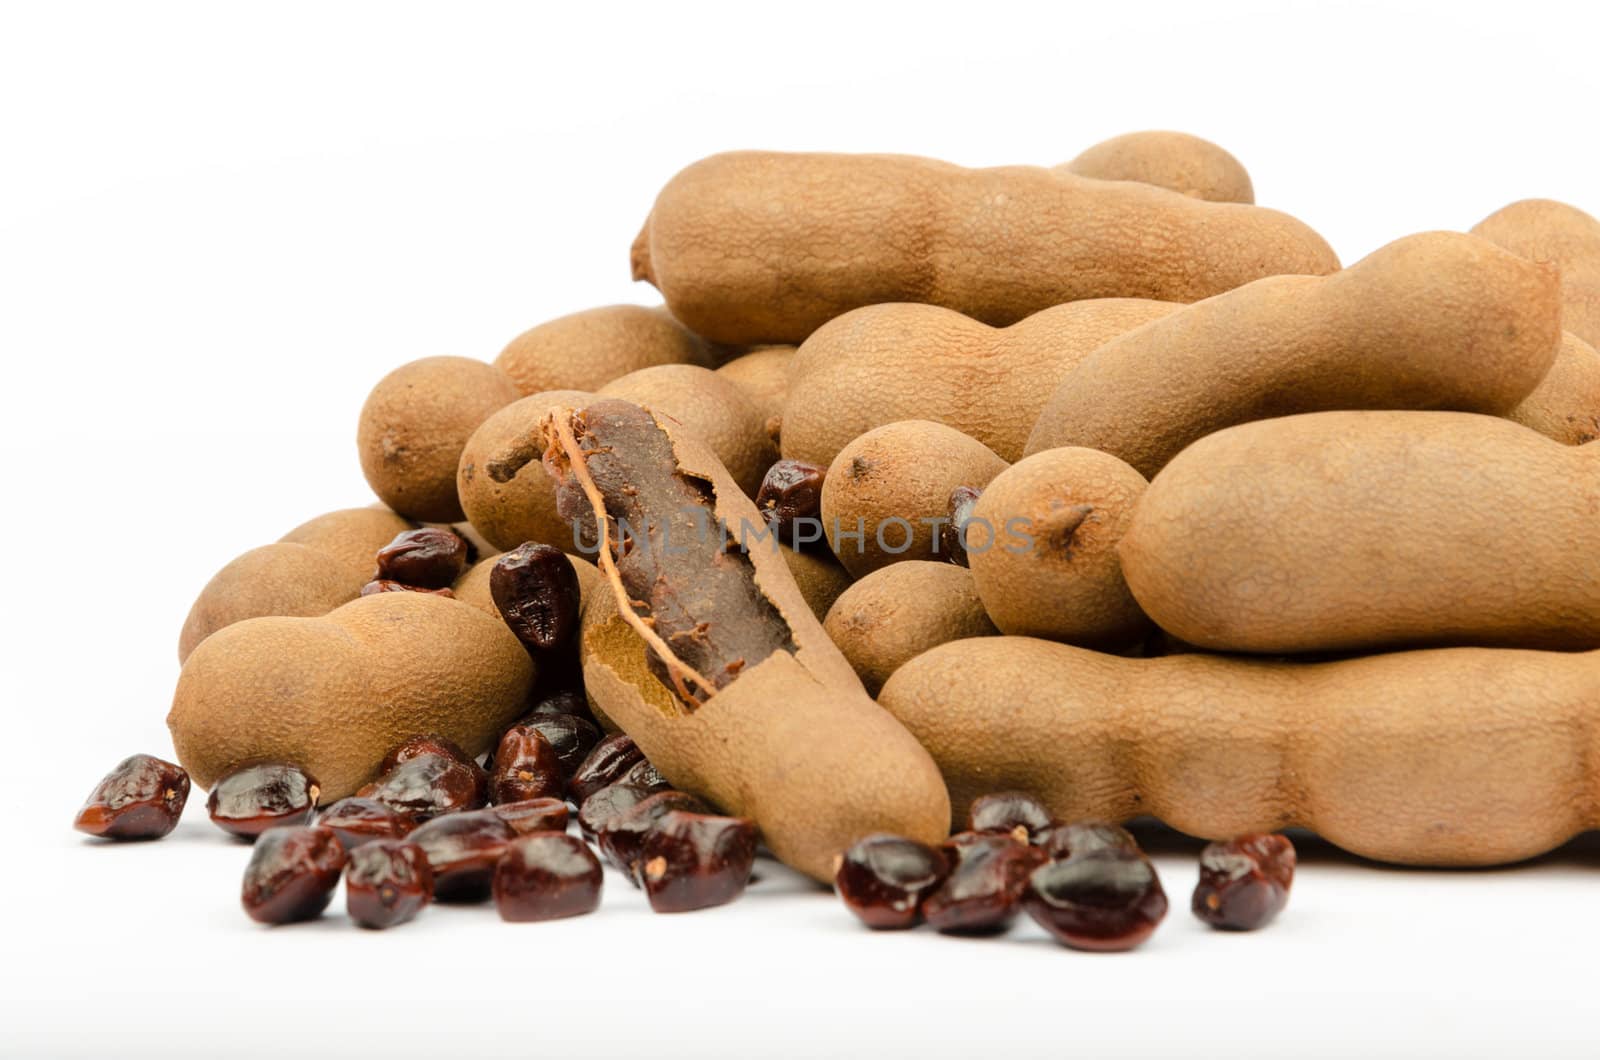 Tamarind - popular food of Southeast Asia, North Africa, India by velislava